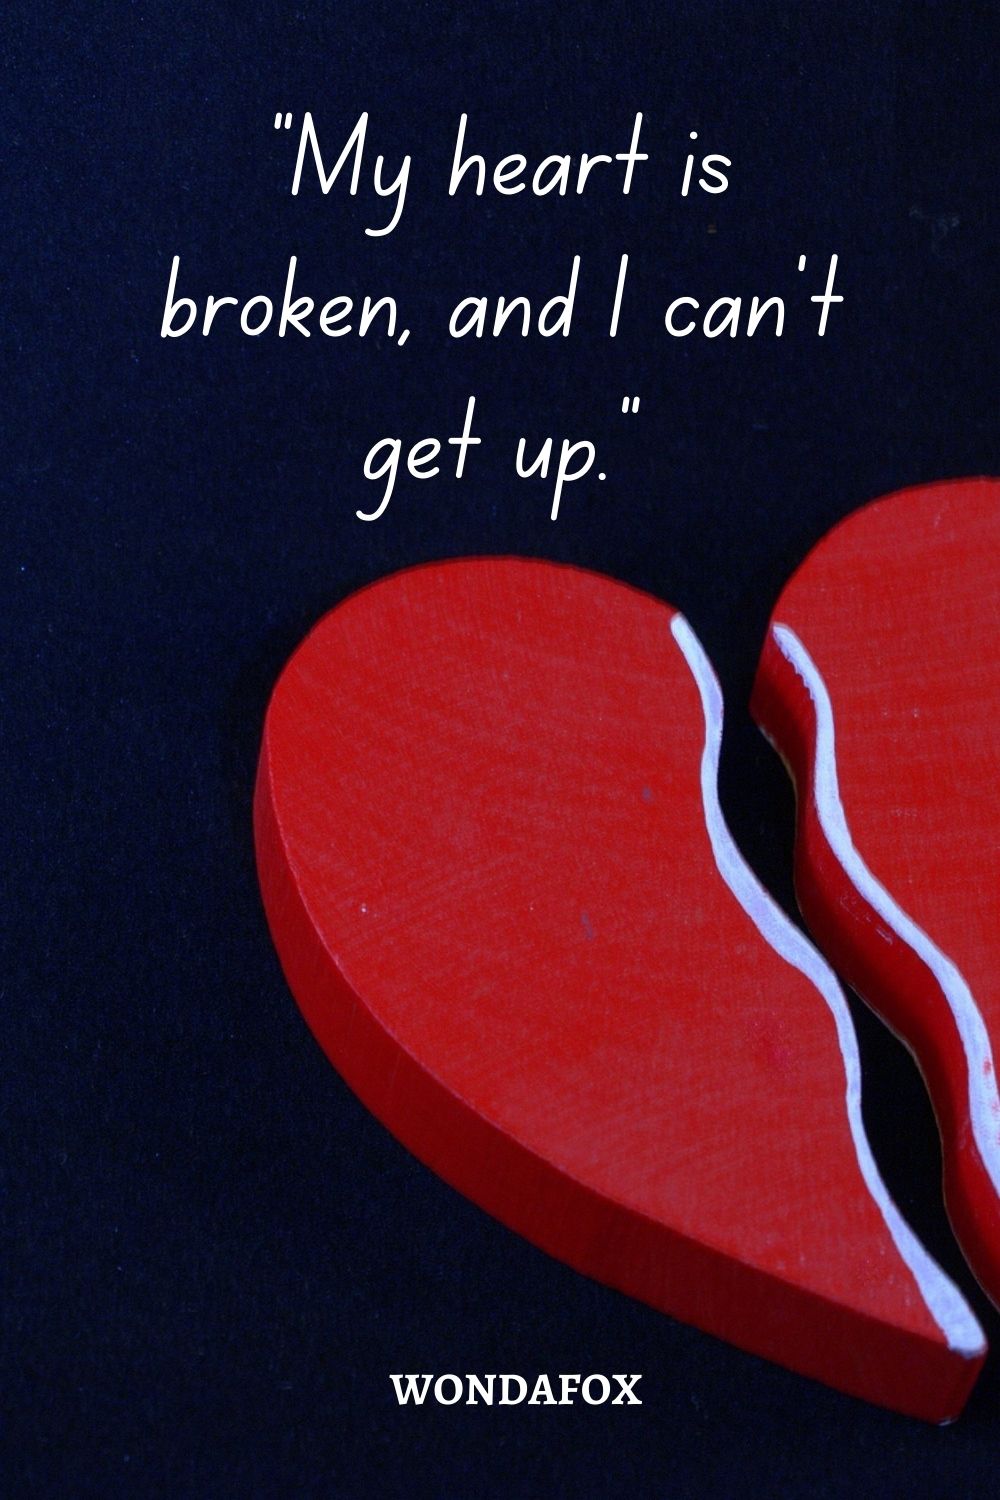 “My heart is broken, and I can't get up.”